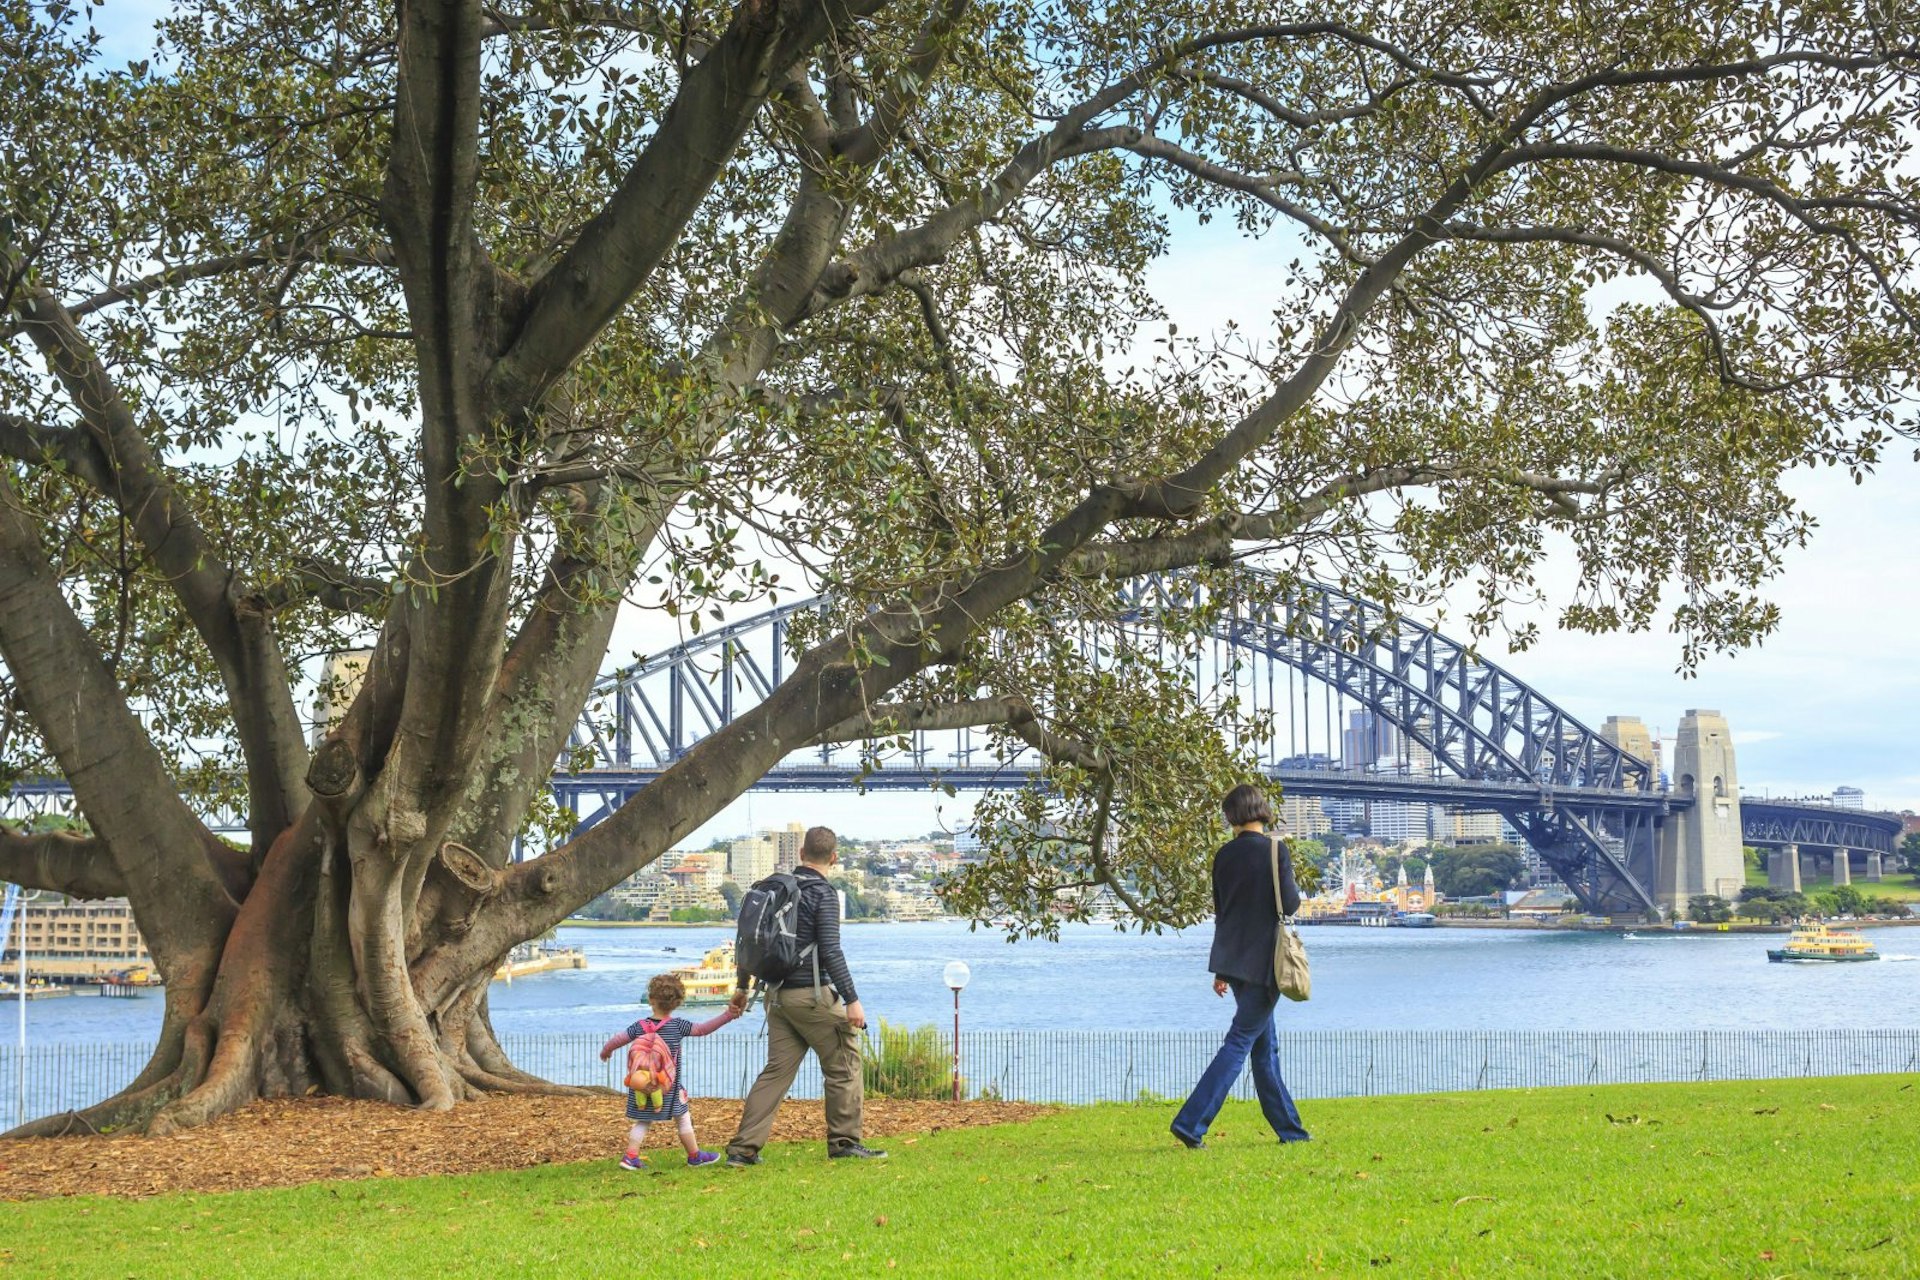 A small child with a backpack walks along holding the hands of an adult, with another adult ahead. The harbour and Harbour Bridge are in the background